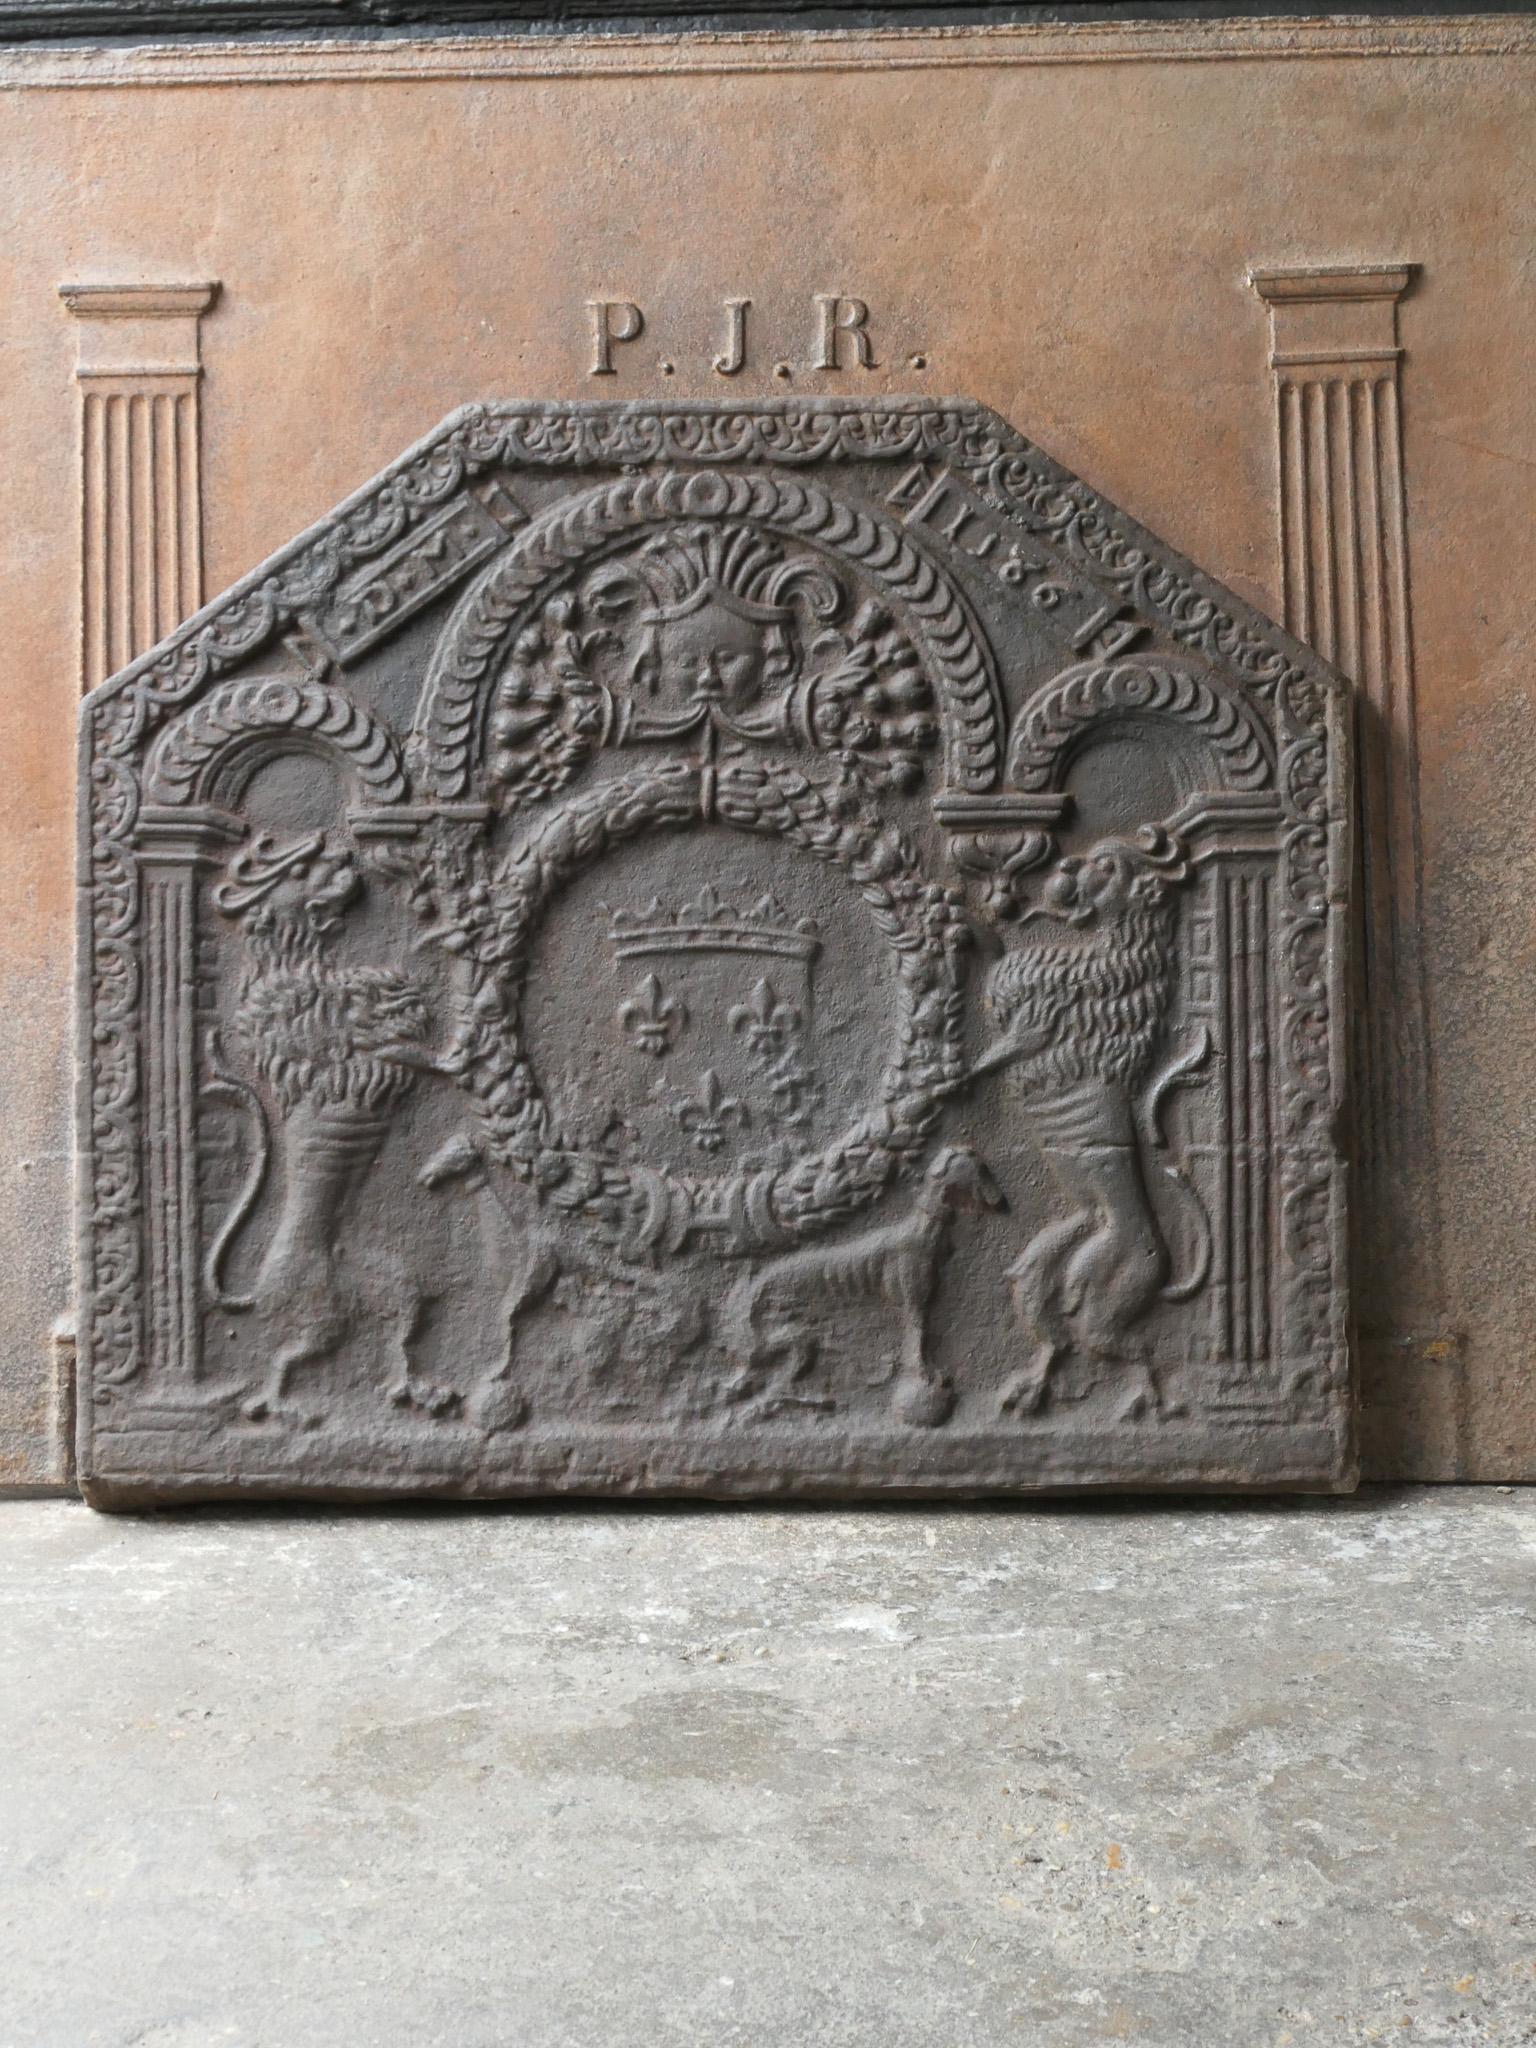 French Louis XIII style fireback with the Arms of France. A coat of arms of the House of Bourbon, an originally French royal house that became a major dynasty in Europe. The house delivered kings for Spain (Navarra), France, both Sicilies and Parma.